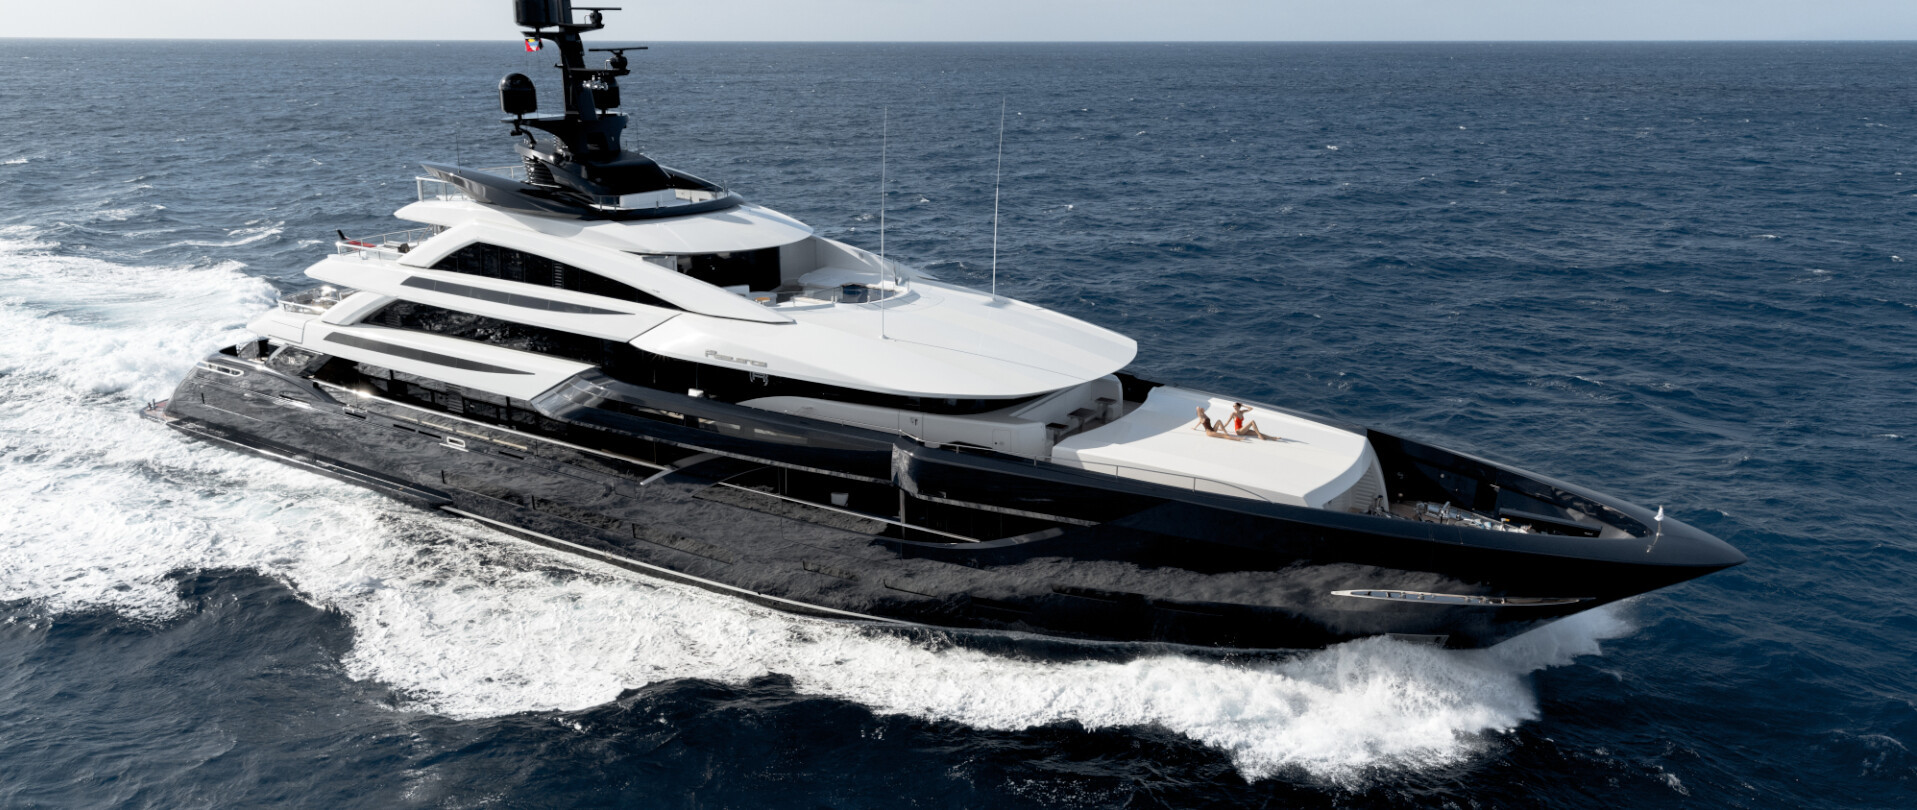 Top reasons to purchase your yacht with Edmiston before the summer